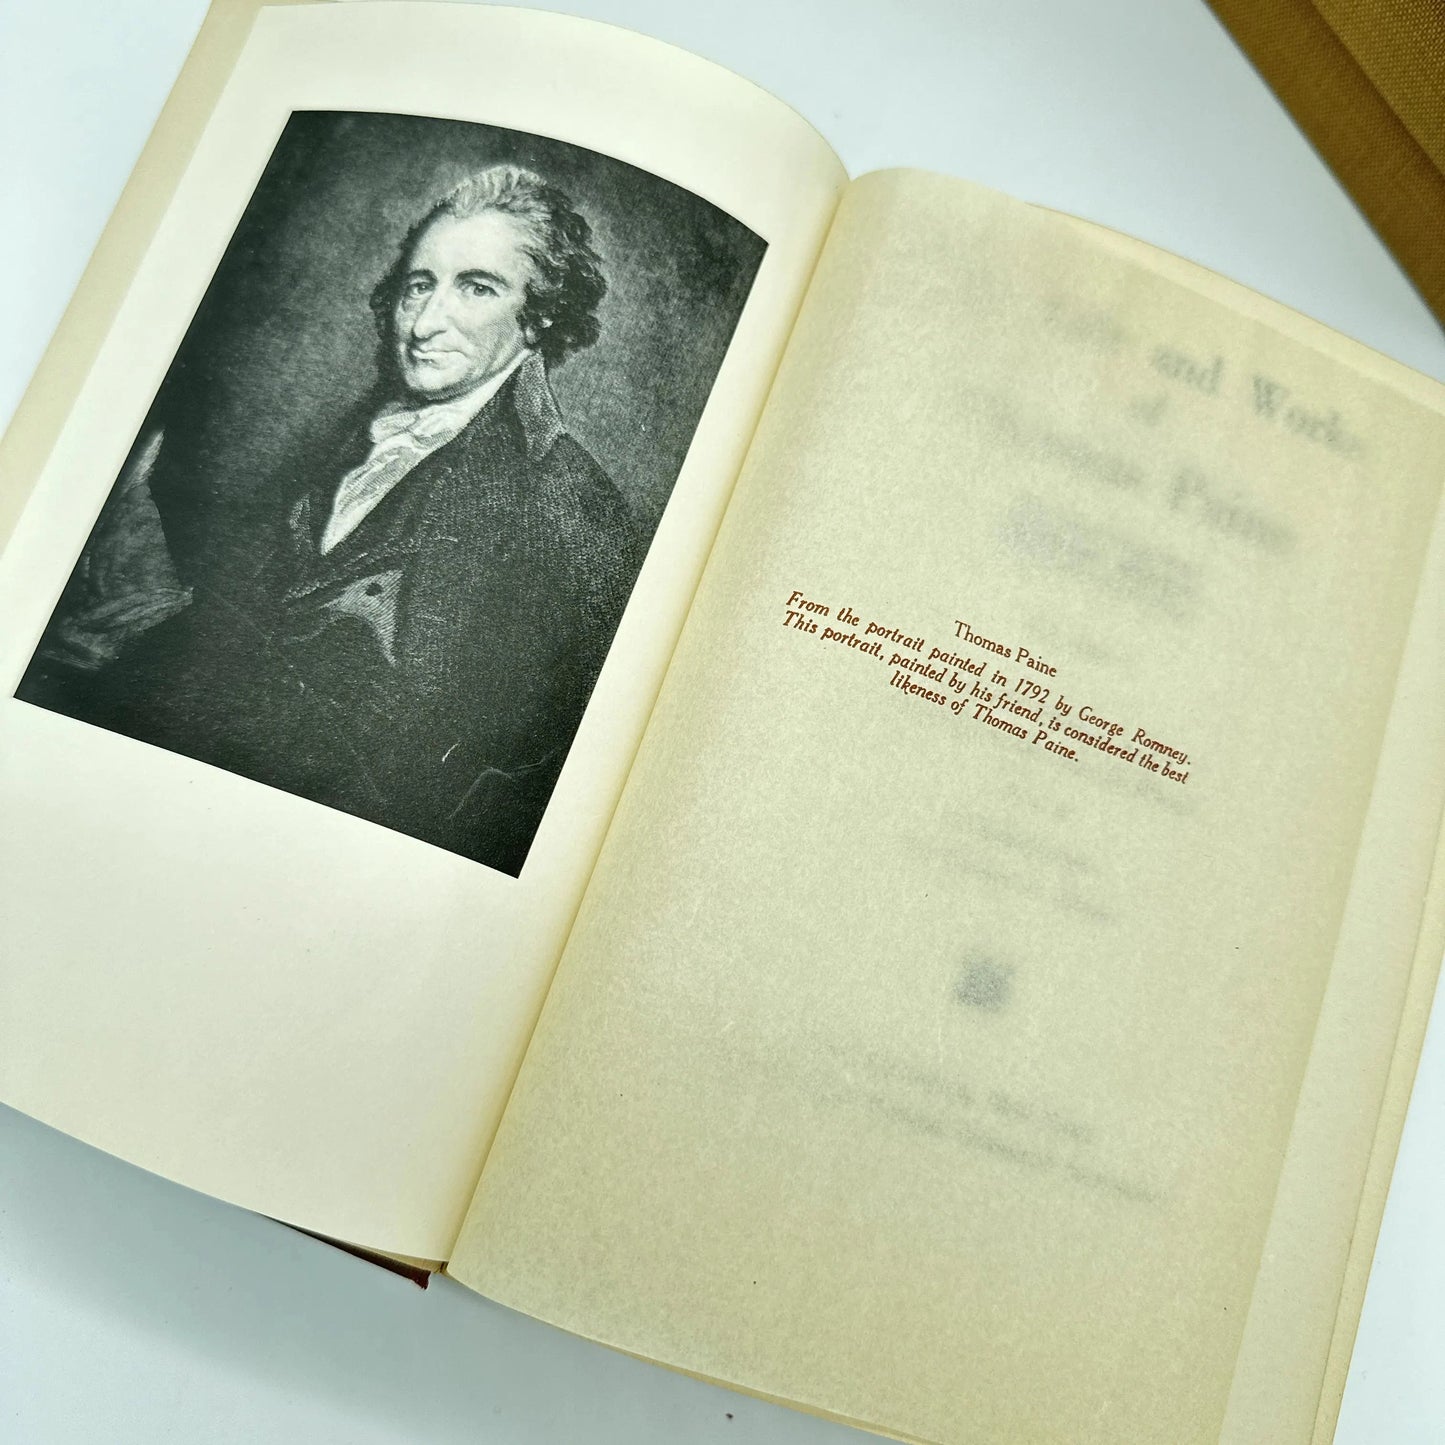 1925 Thomas Paine's Life & Works in 10 volumes— With an introduction by Thomas A. Edison